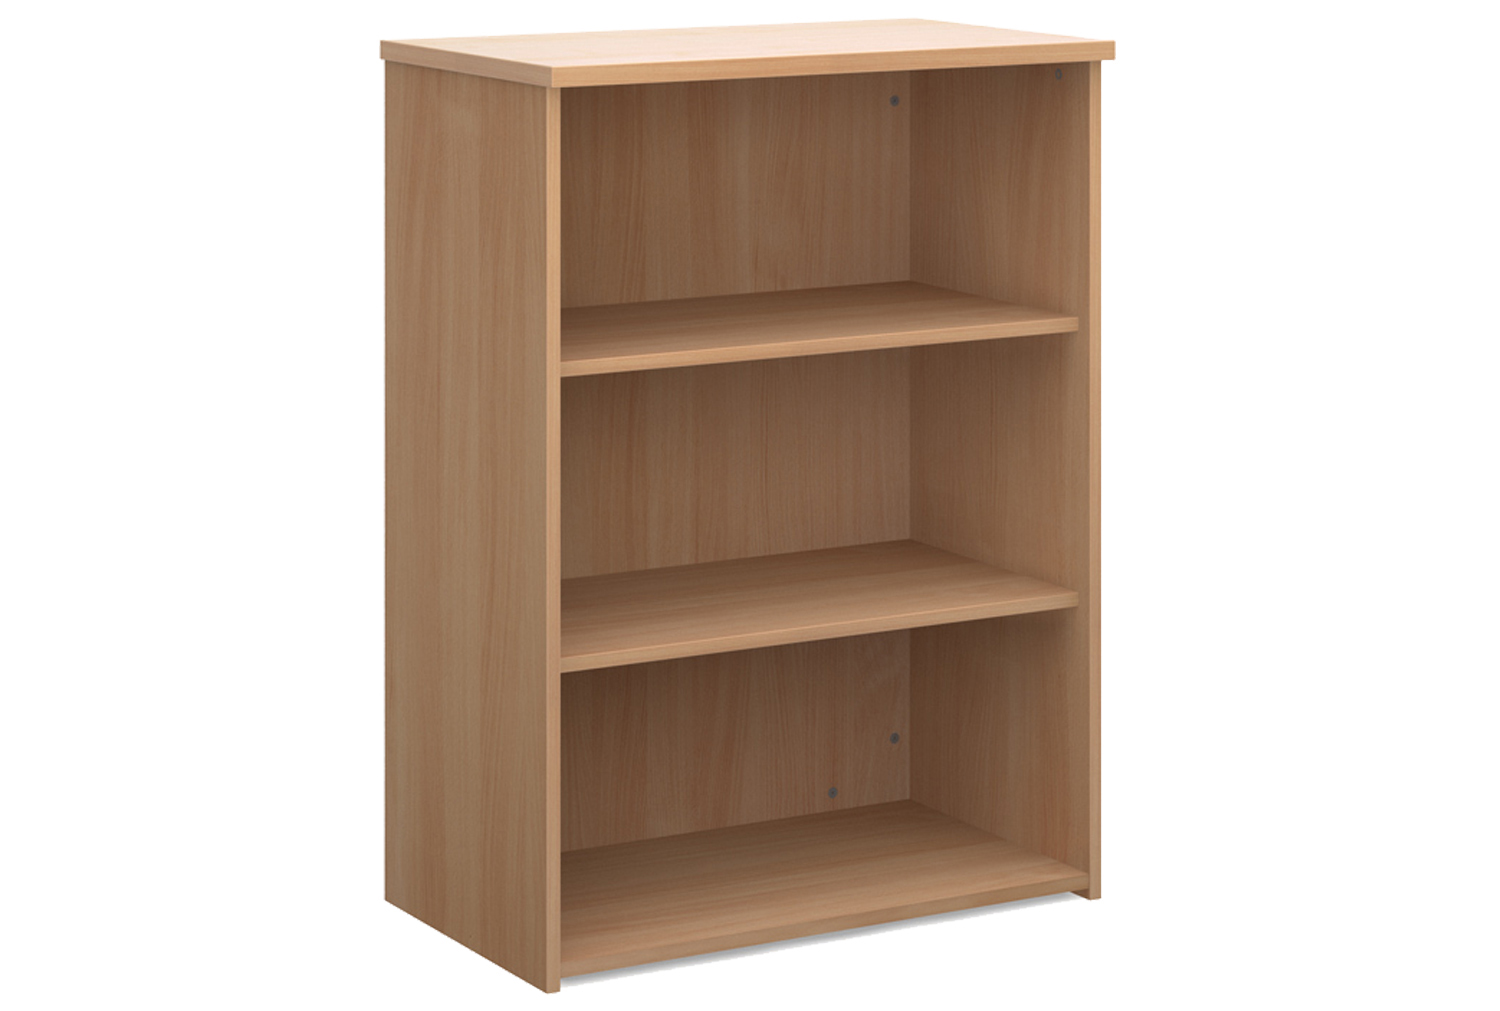 All Beech Office Bookcases, 2 Shelf - 80wx47dx109h (cm), Fully Installed